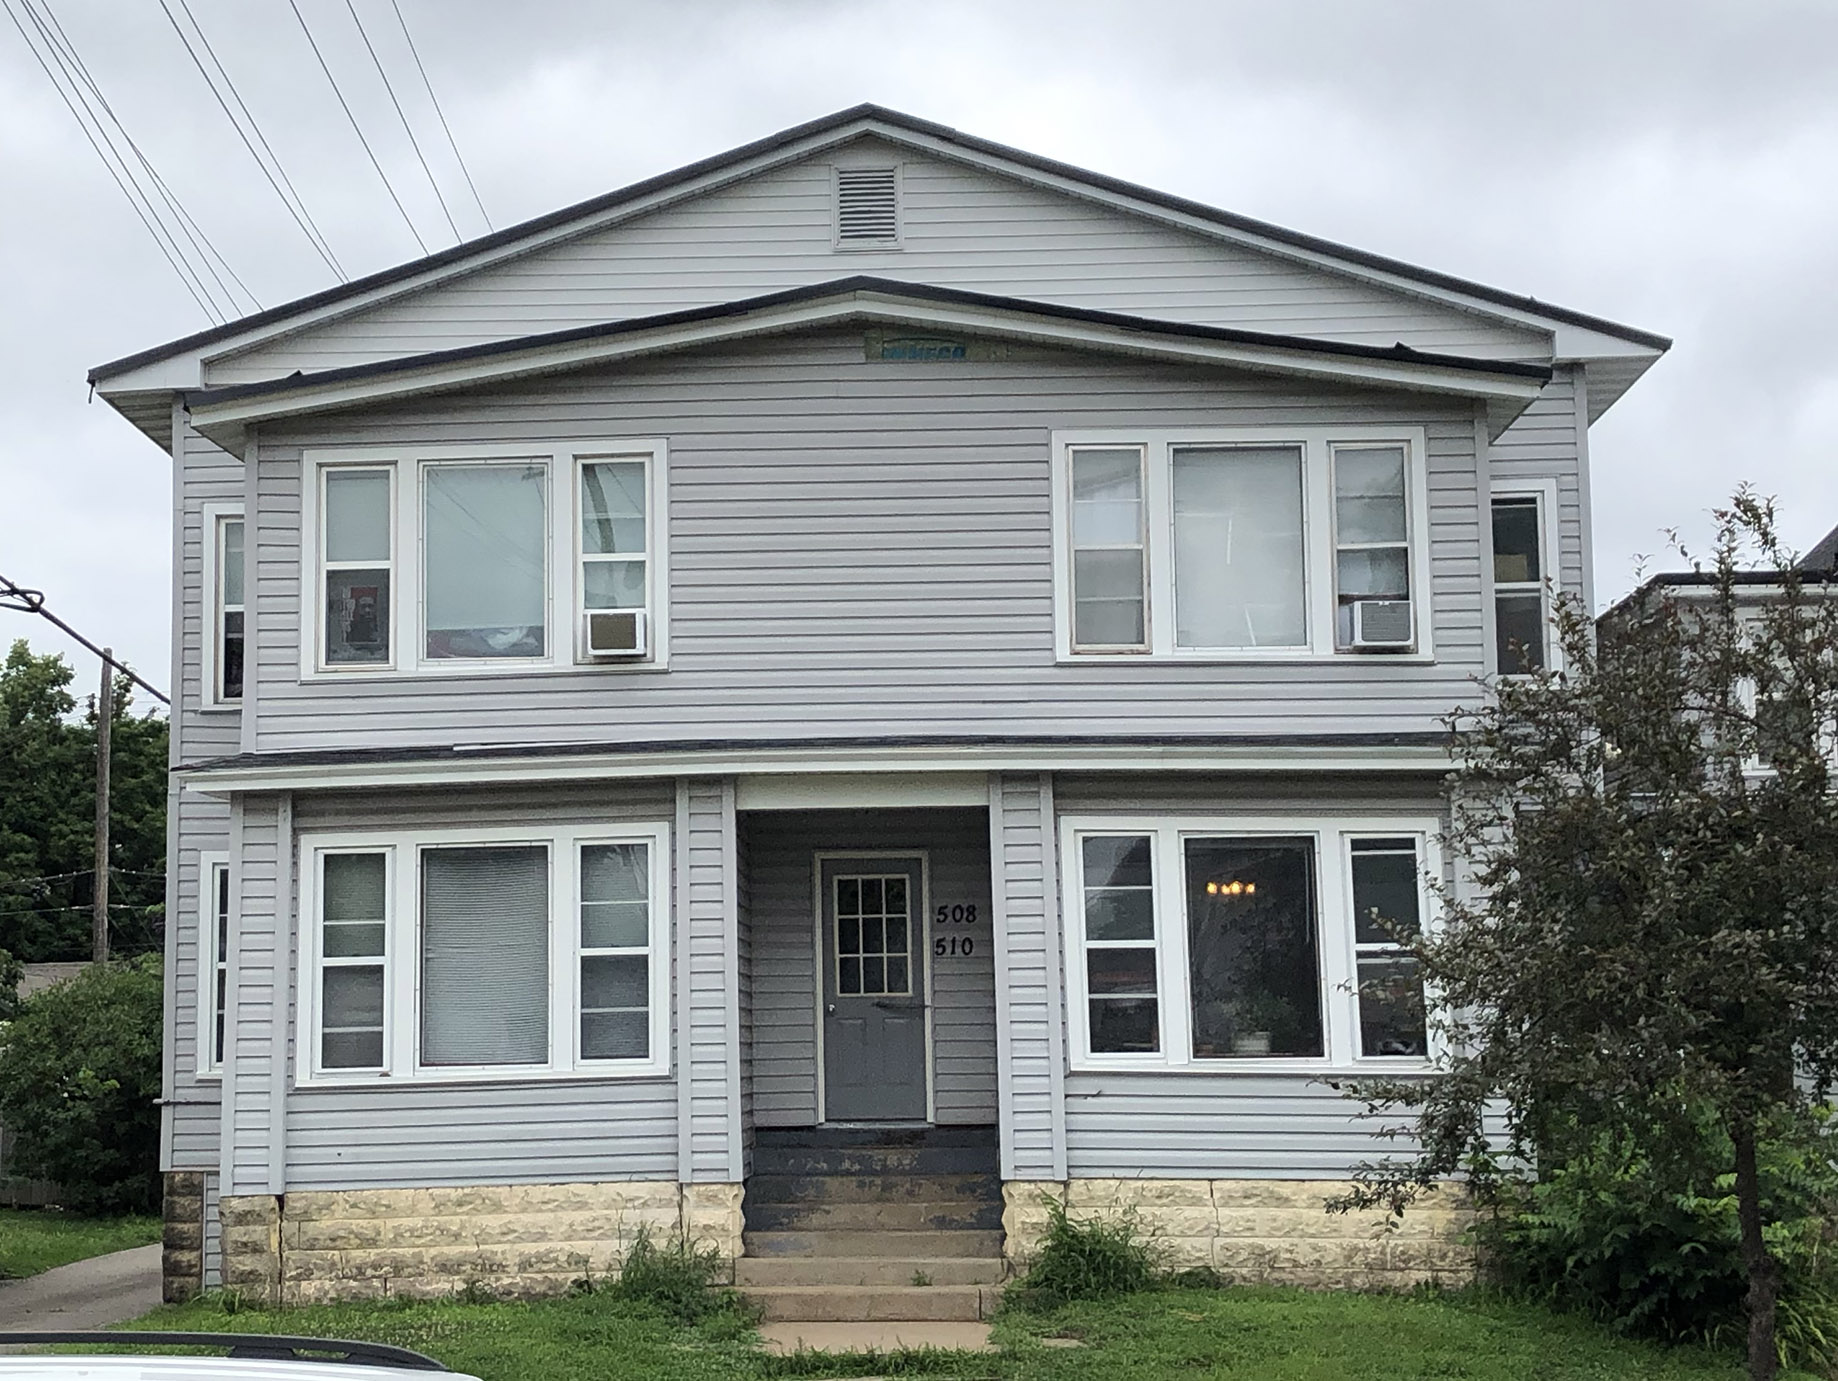 508 West Grand Ave, Eau Claire, Wisconsin 54703, 2 Bedrooms Bedrooms, ,1 BathroomBathrooms,Multi-Family,Apartment,508 West Grand Ave,1126